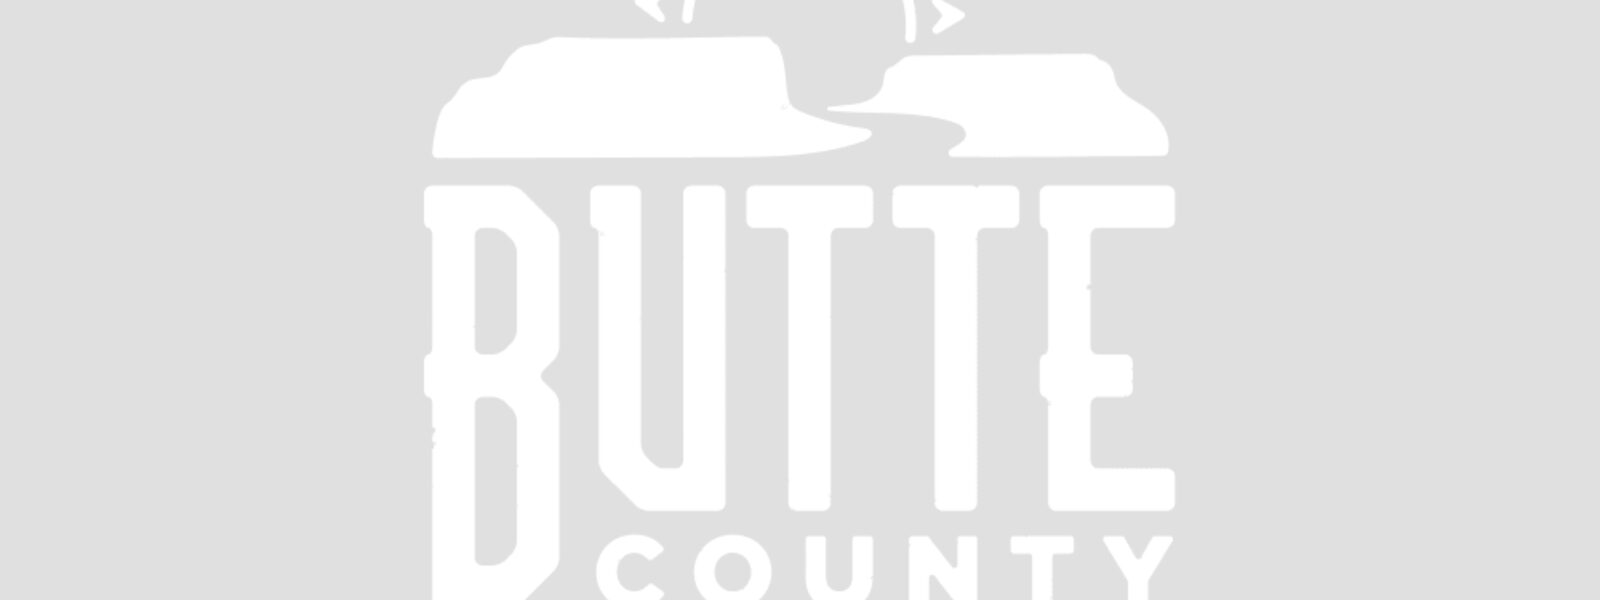 The Bounty of Butte County